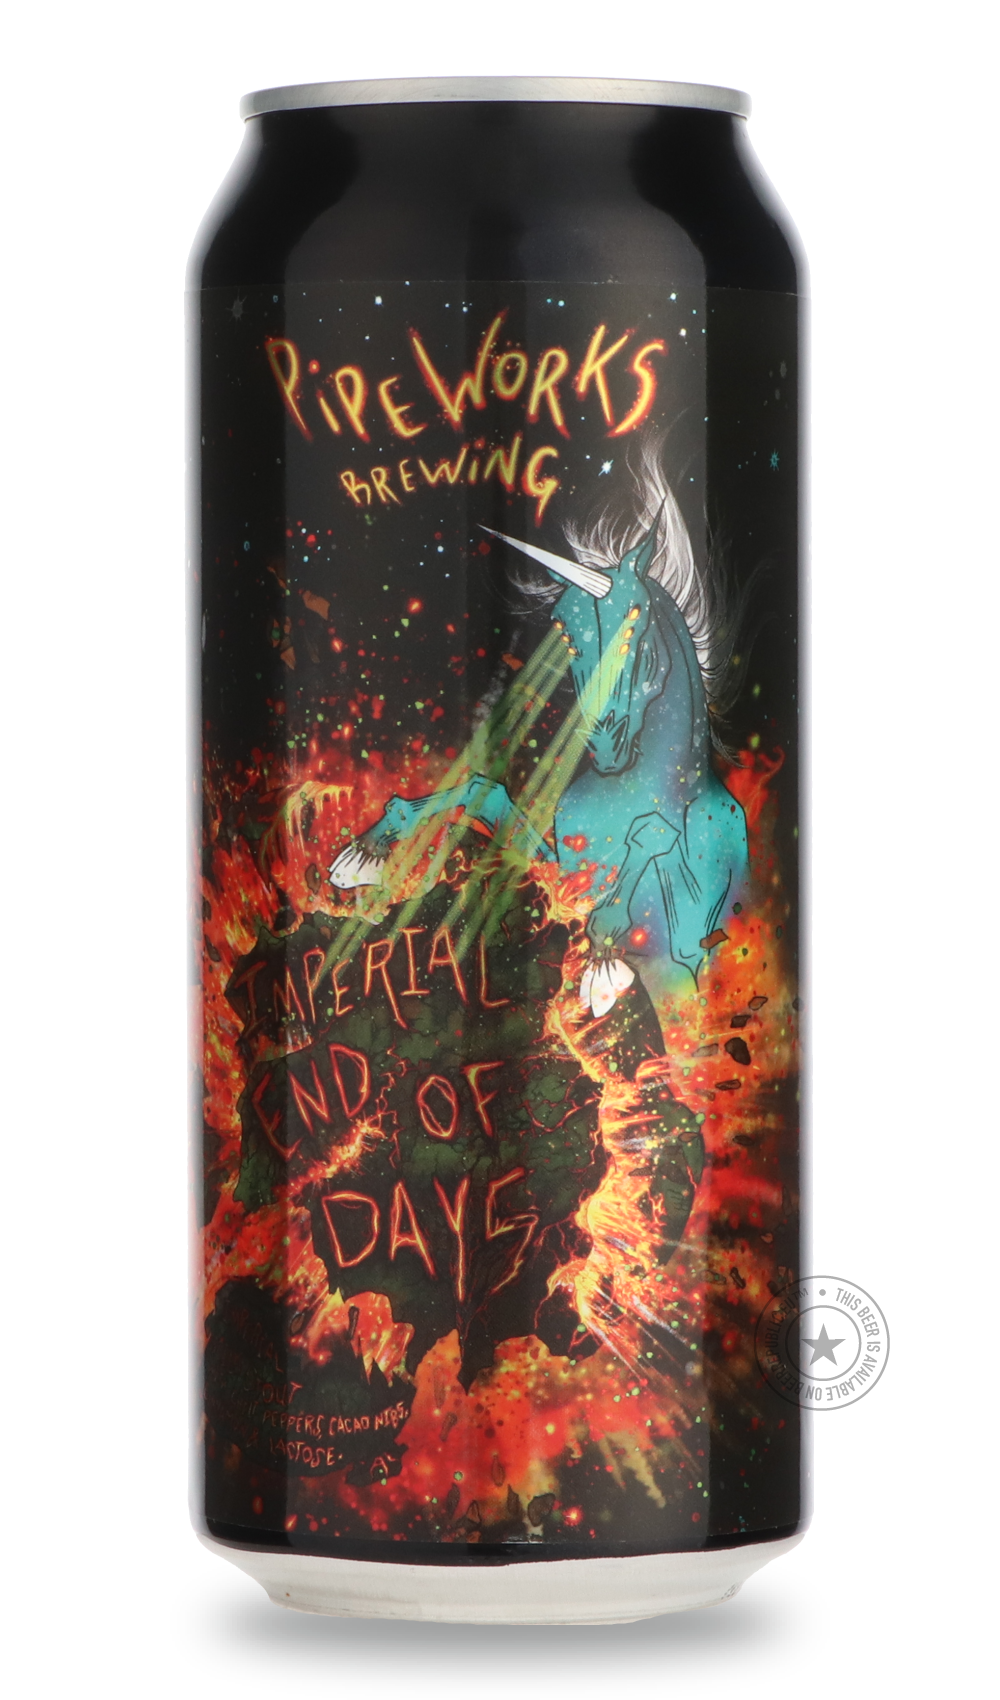 -Pipeworks- Imperial End Of Days-Stout & Porter- Only @ Beer Republic - The best online beer store for American & Canadian craft beer - Buy beer online from the USA and Canada - Bier online kopen - Amerikaans bier kopen - Craft beer store - Craft beer kopen - Amerikanisch bier kaufen - Bier online kaufen - Acheter biere online - IPA - Stout - Porter - New England IPA - Hazy IPA - Imperial Stout - Barrel Aged - Barrel Aged Imperial Stout - Brown - Dark beer - Blond - Blonde - Pilsner - Lager - Wheat - Weizen